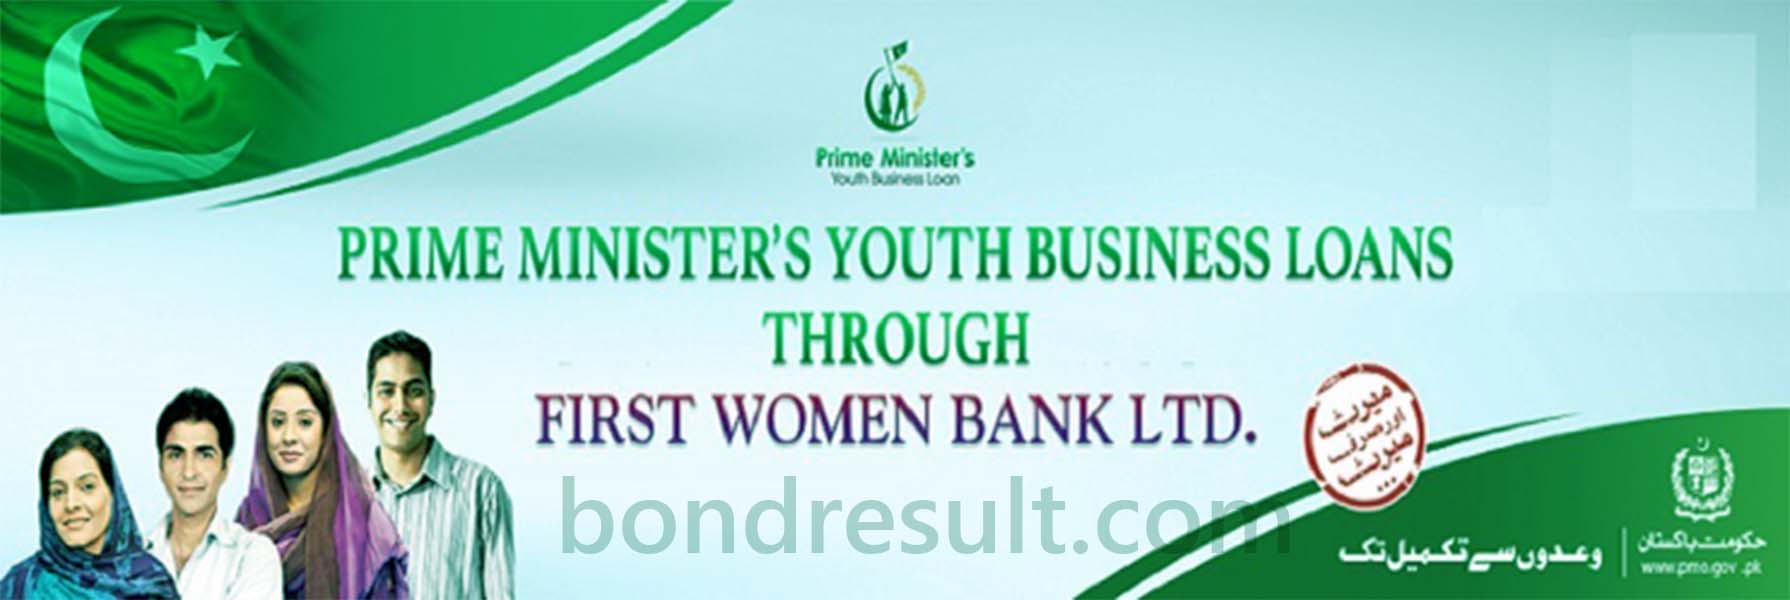 Prime Minister's Youth Loans 2021 for Small Business